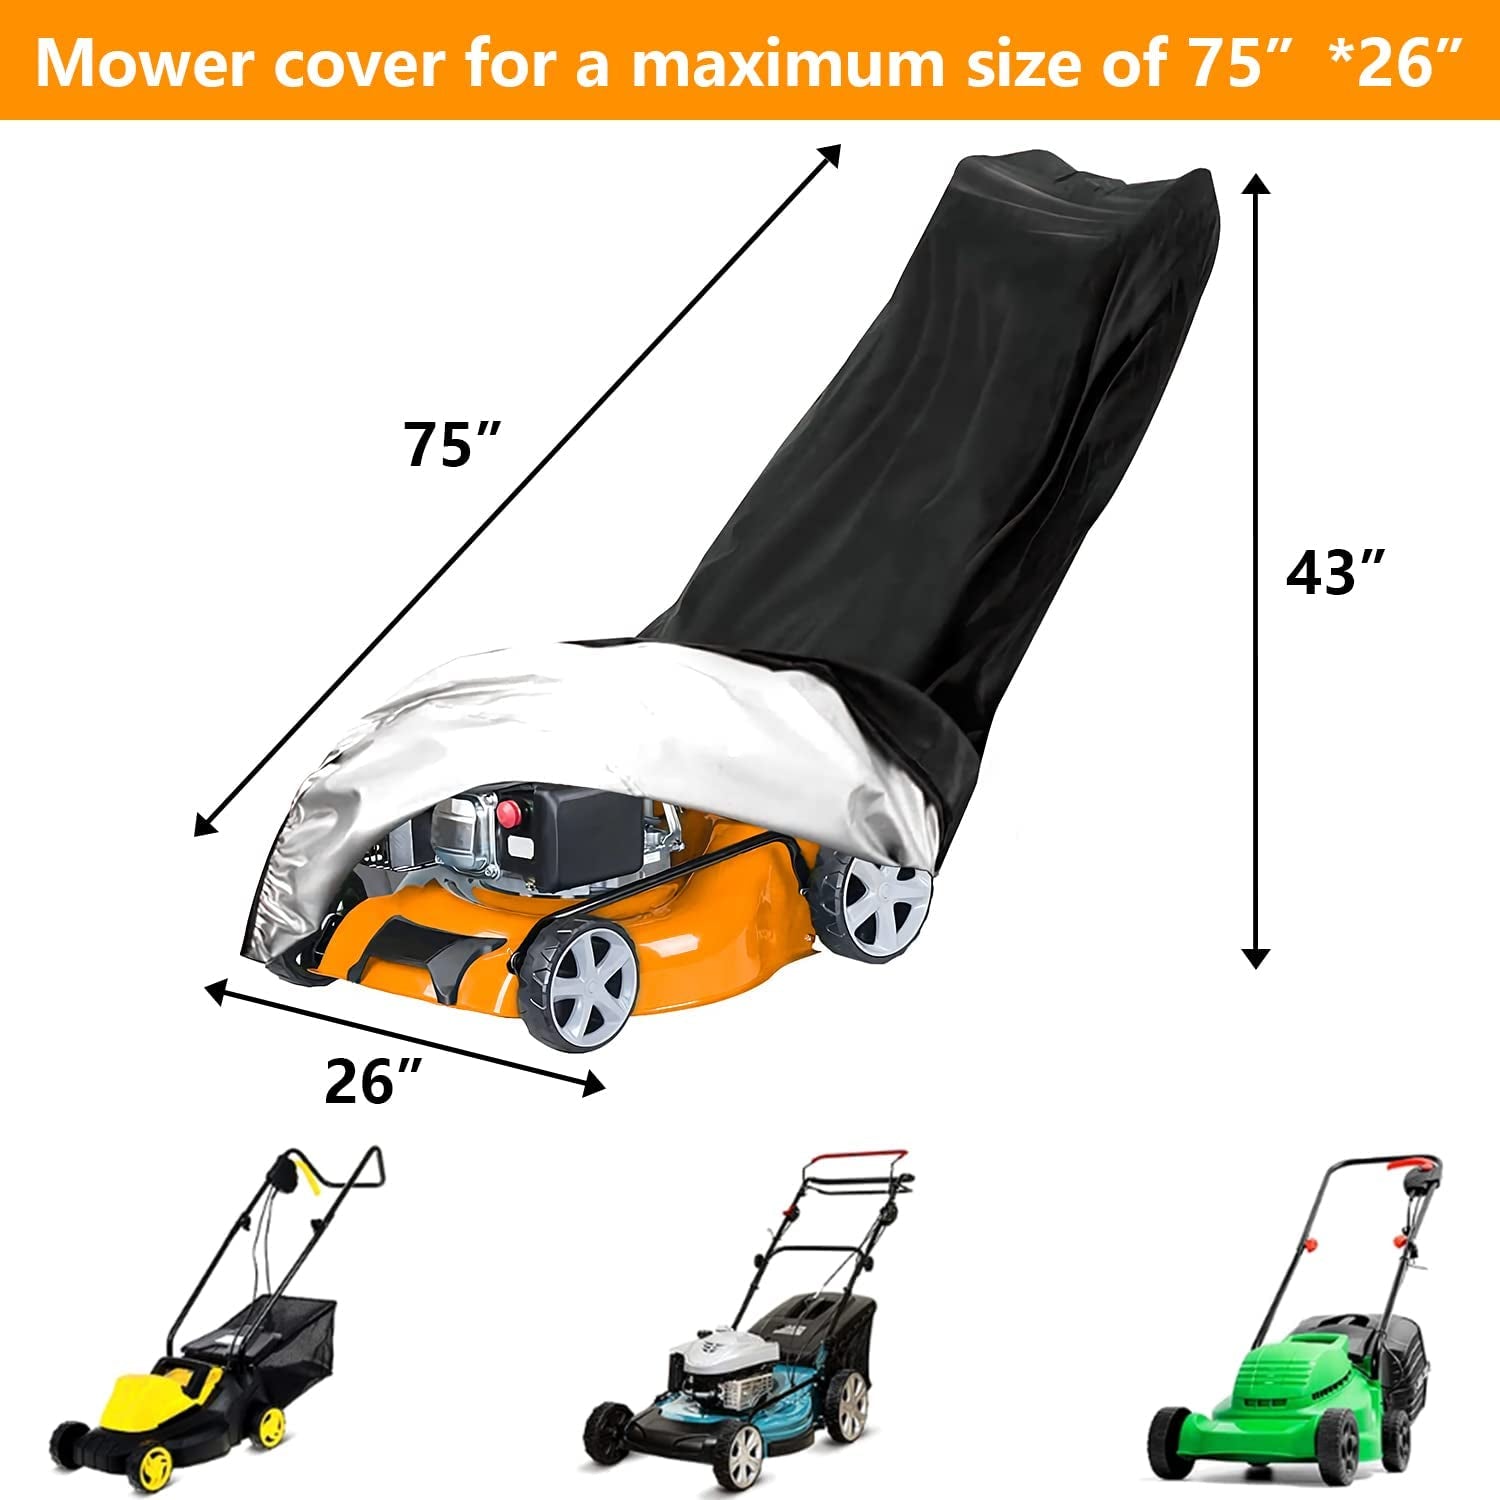 ZVF, Lawn Mower Cover, ZVF 300D Oxford Lawn Mower Cover Waterproof for Most Size Push Mower, anti Uv&Dustproof with Drawstring,Storage Bag and Buckle (74"X 26")